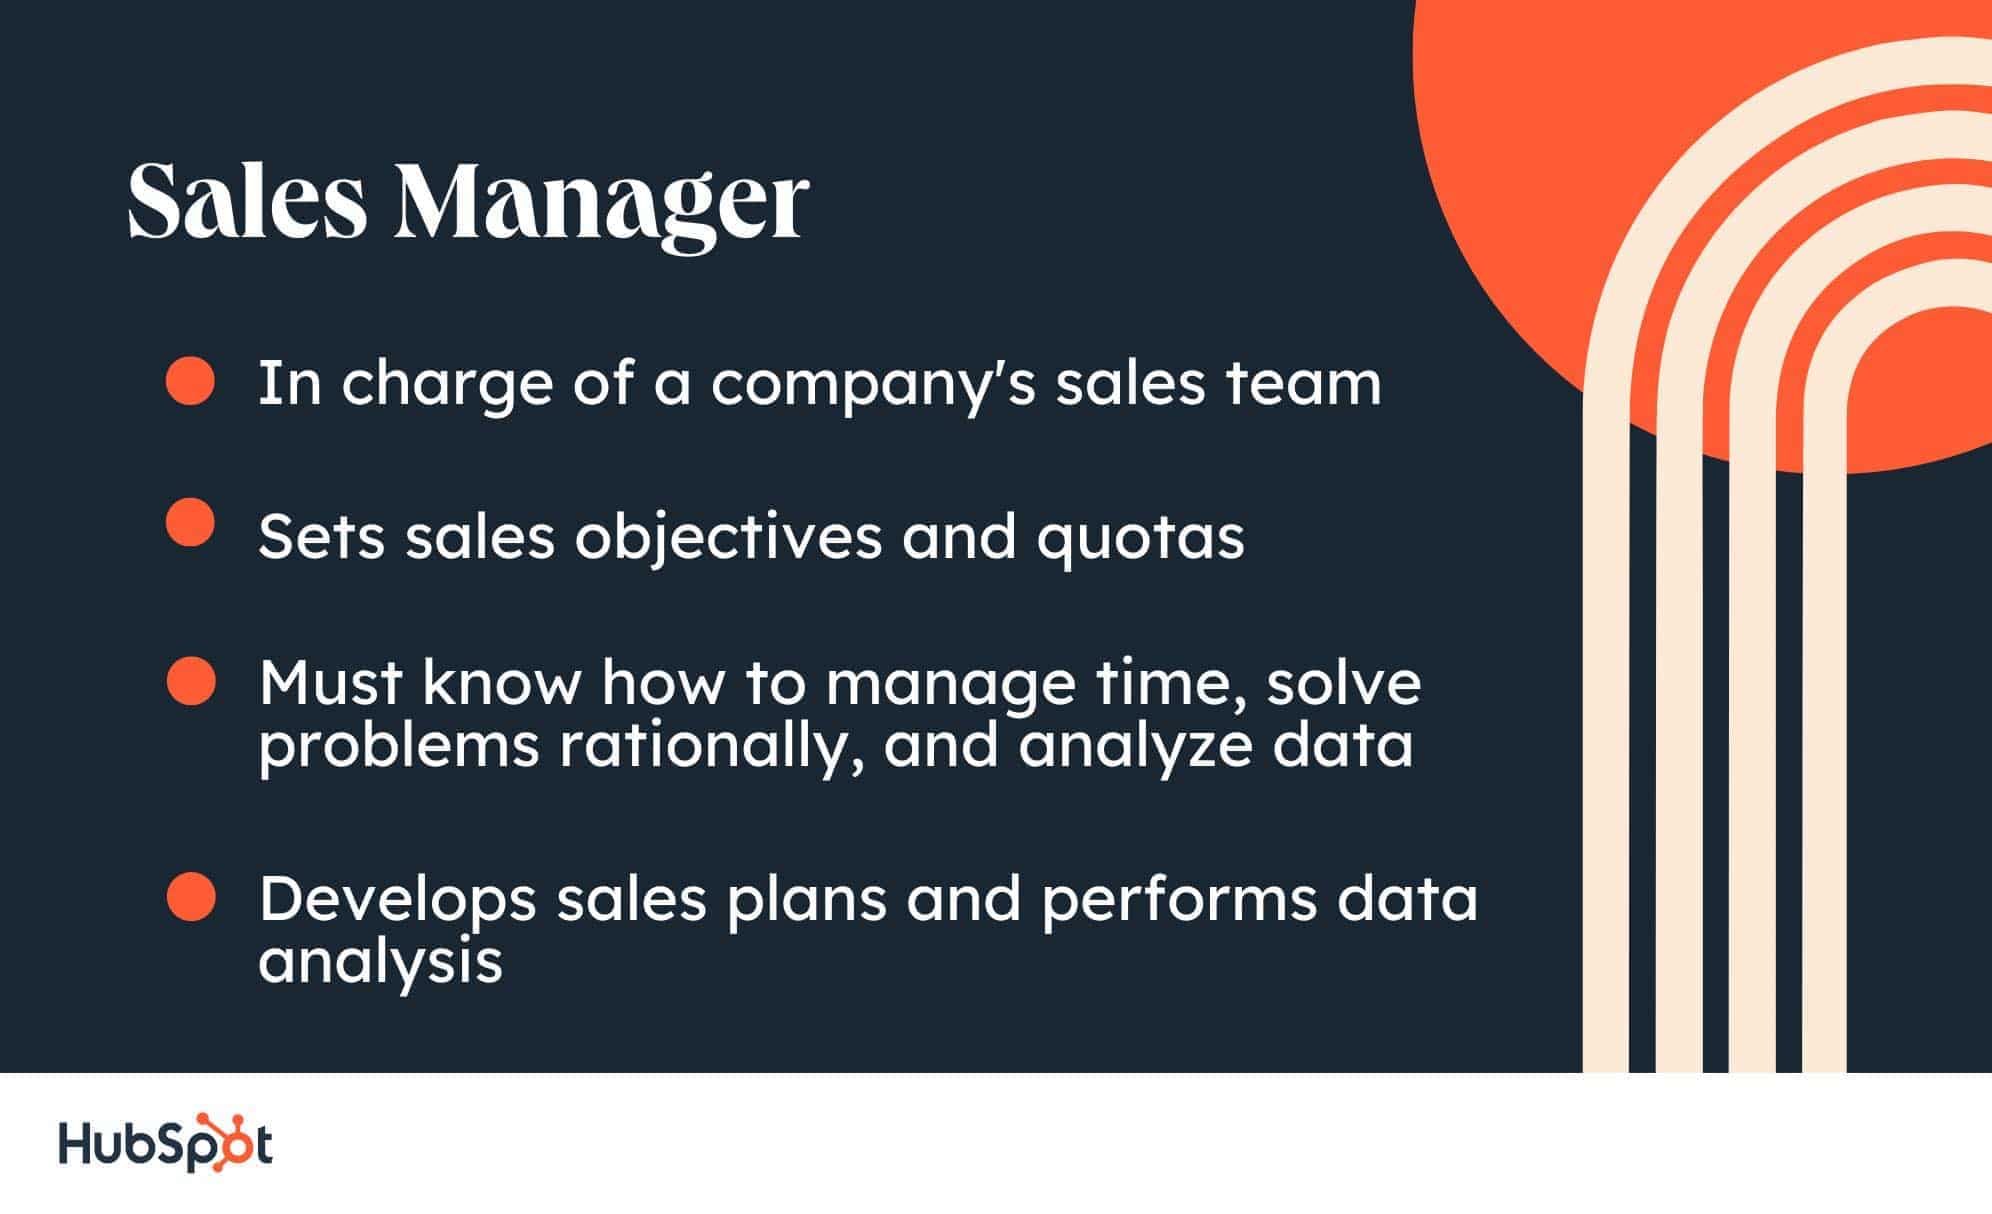 Sales Manager. In charge of a company's sales team. Sets sales objectives and quotas. Must know how to manage time, solve problems rationally, and analyze data. Develops sales plans and performs data analysis.